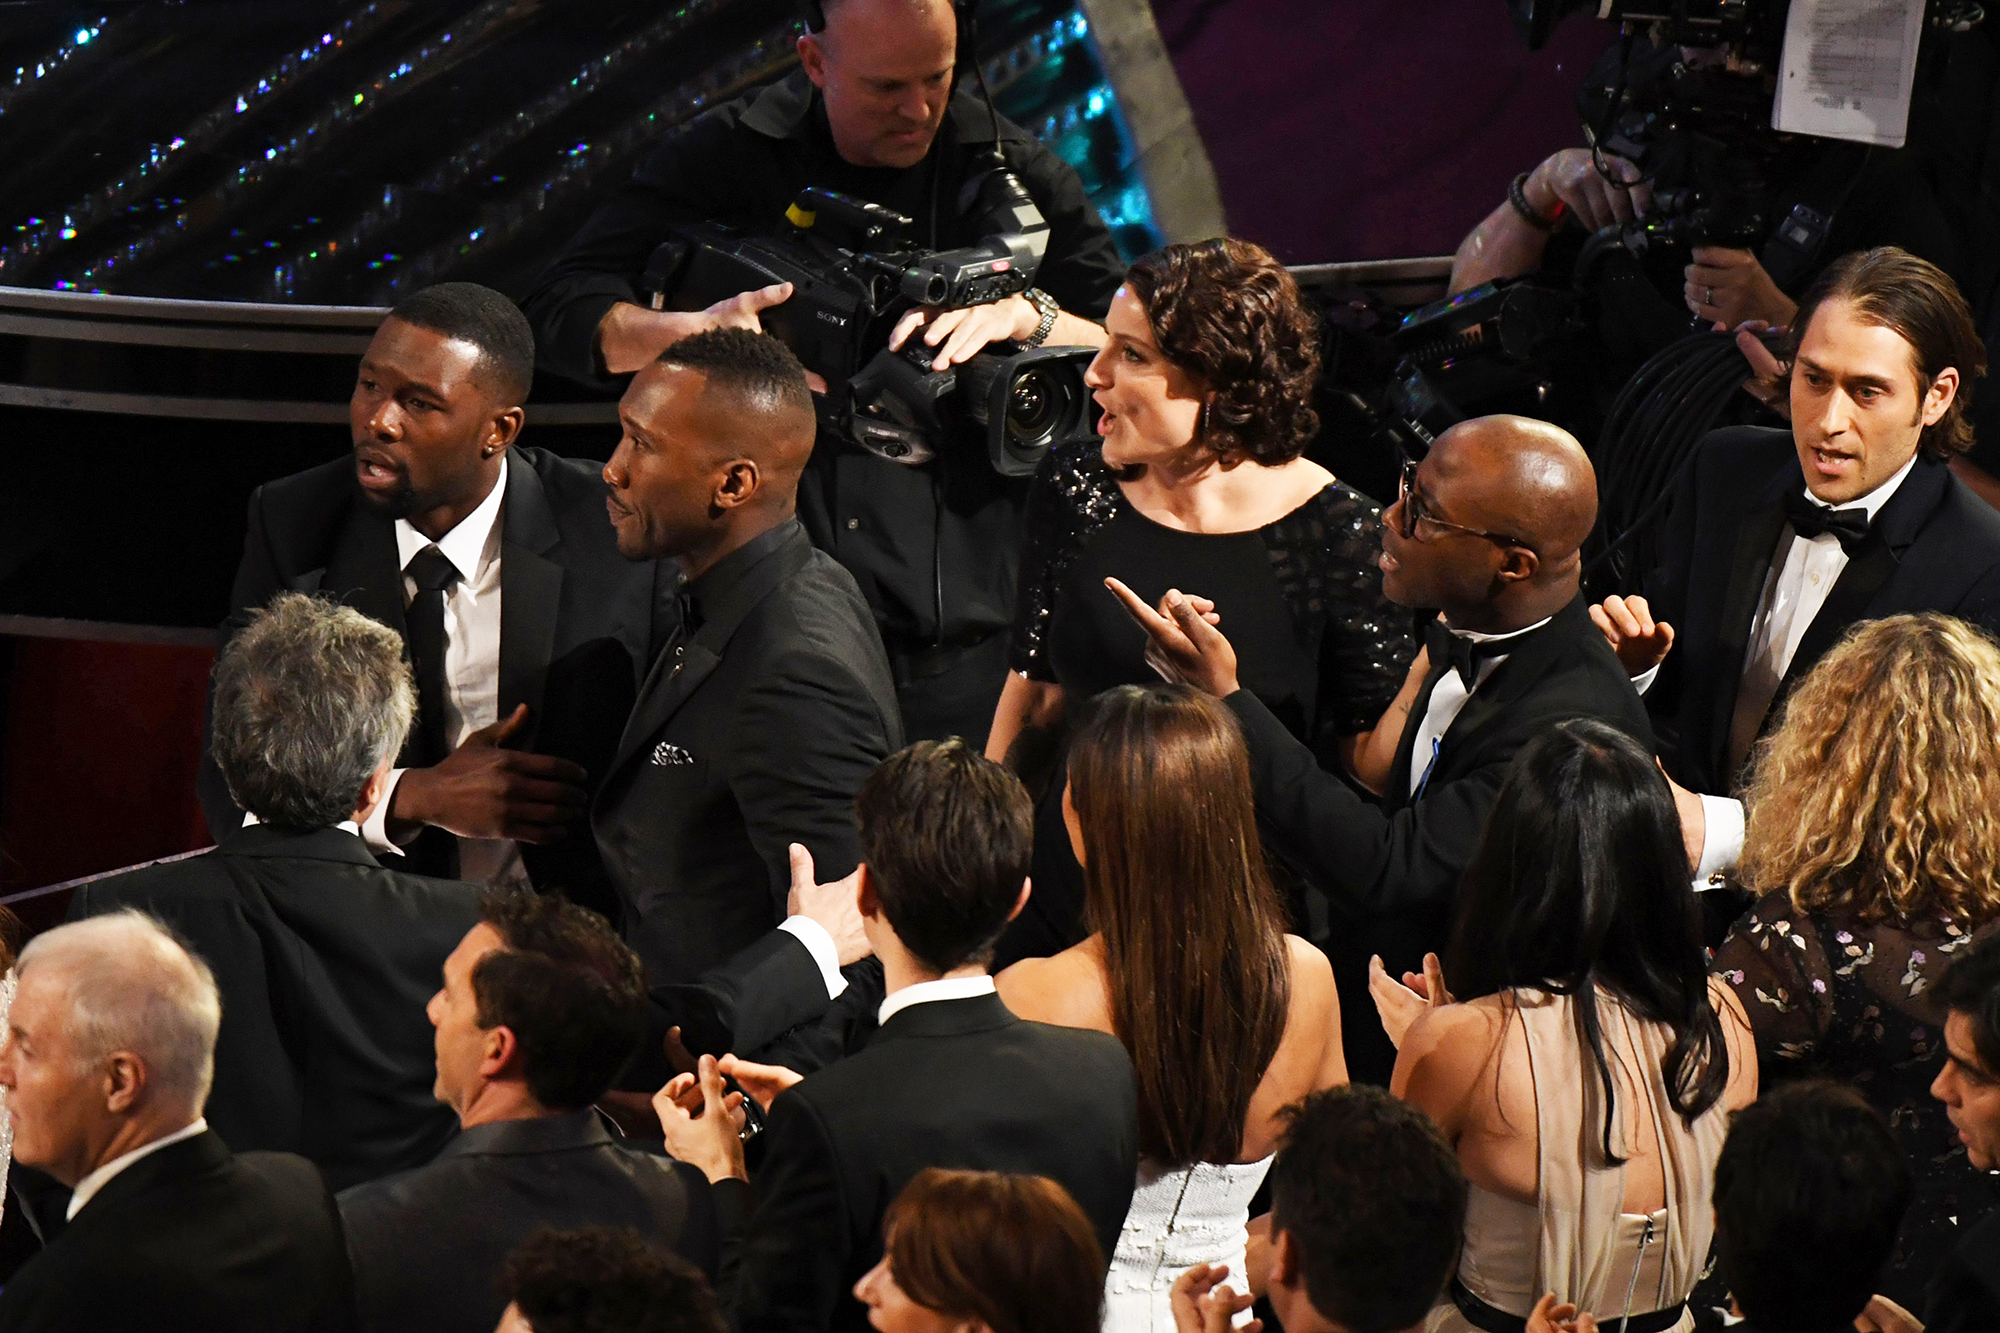 The cast and crew of <i>Moonlight</i> react after they won the Best Picture Oscar, on Feb. 26, 2017 in Hollywood, Calif. (Mark Ralston—AFP/Getty Images)